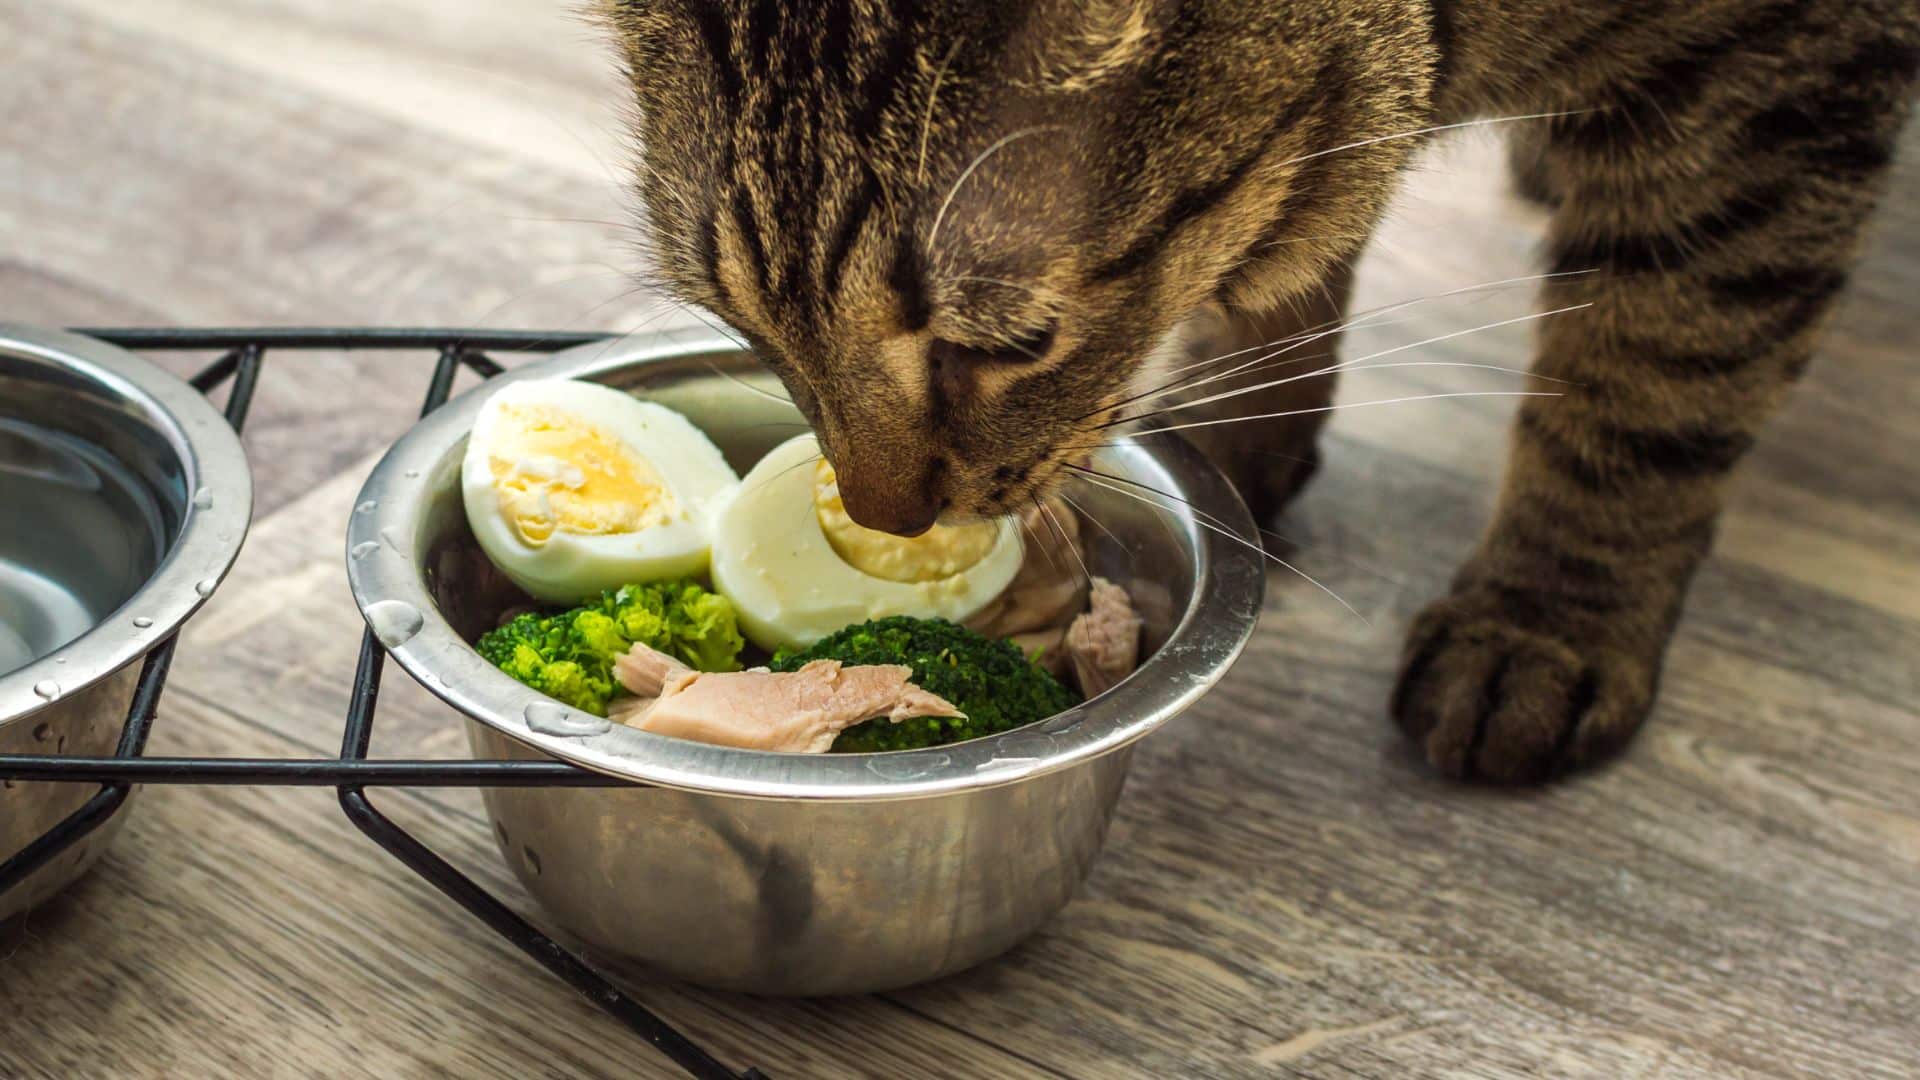 Use soluble fiber for elderly cats with constipation